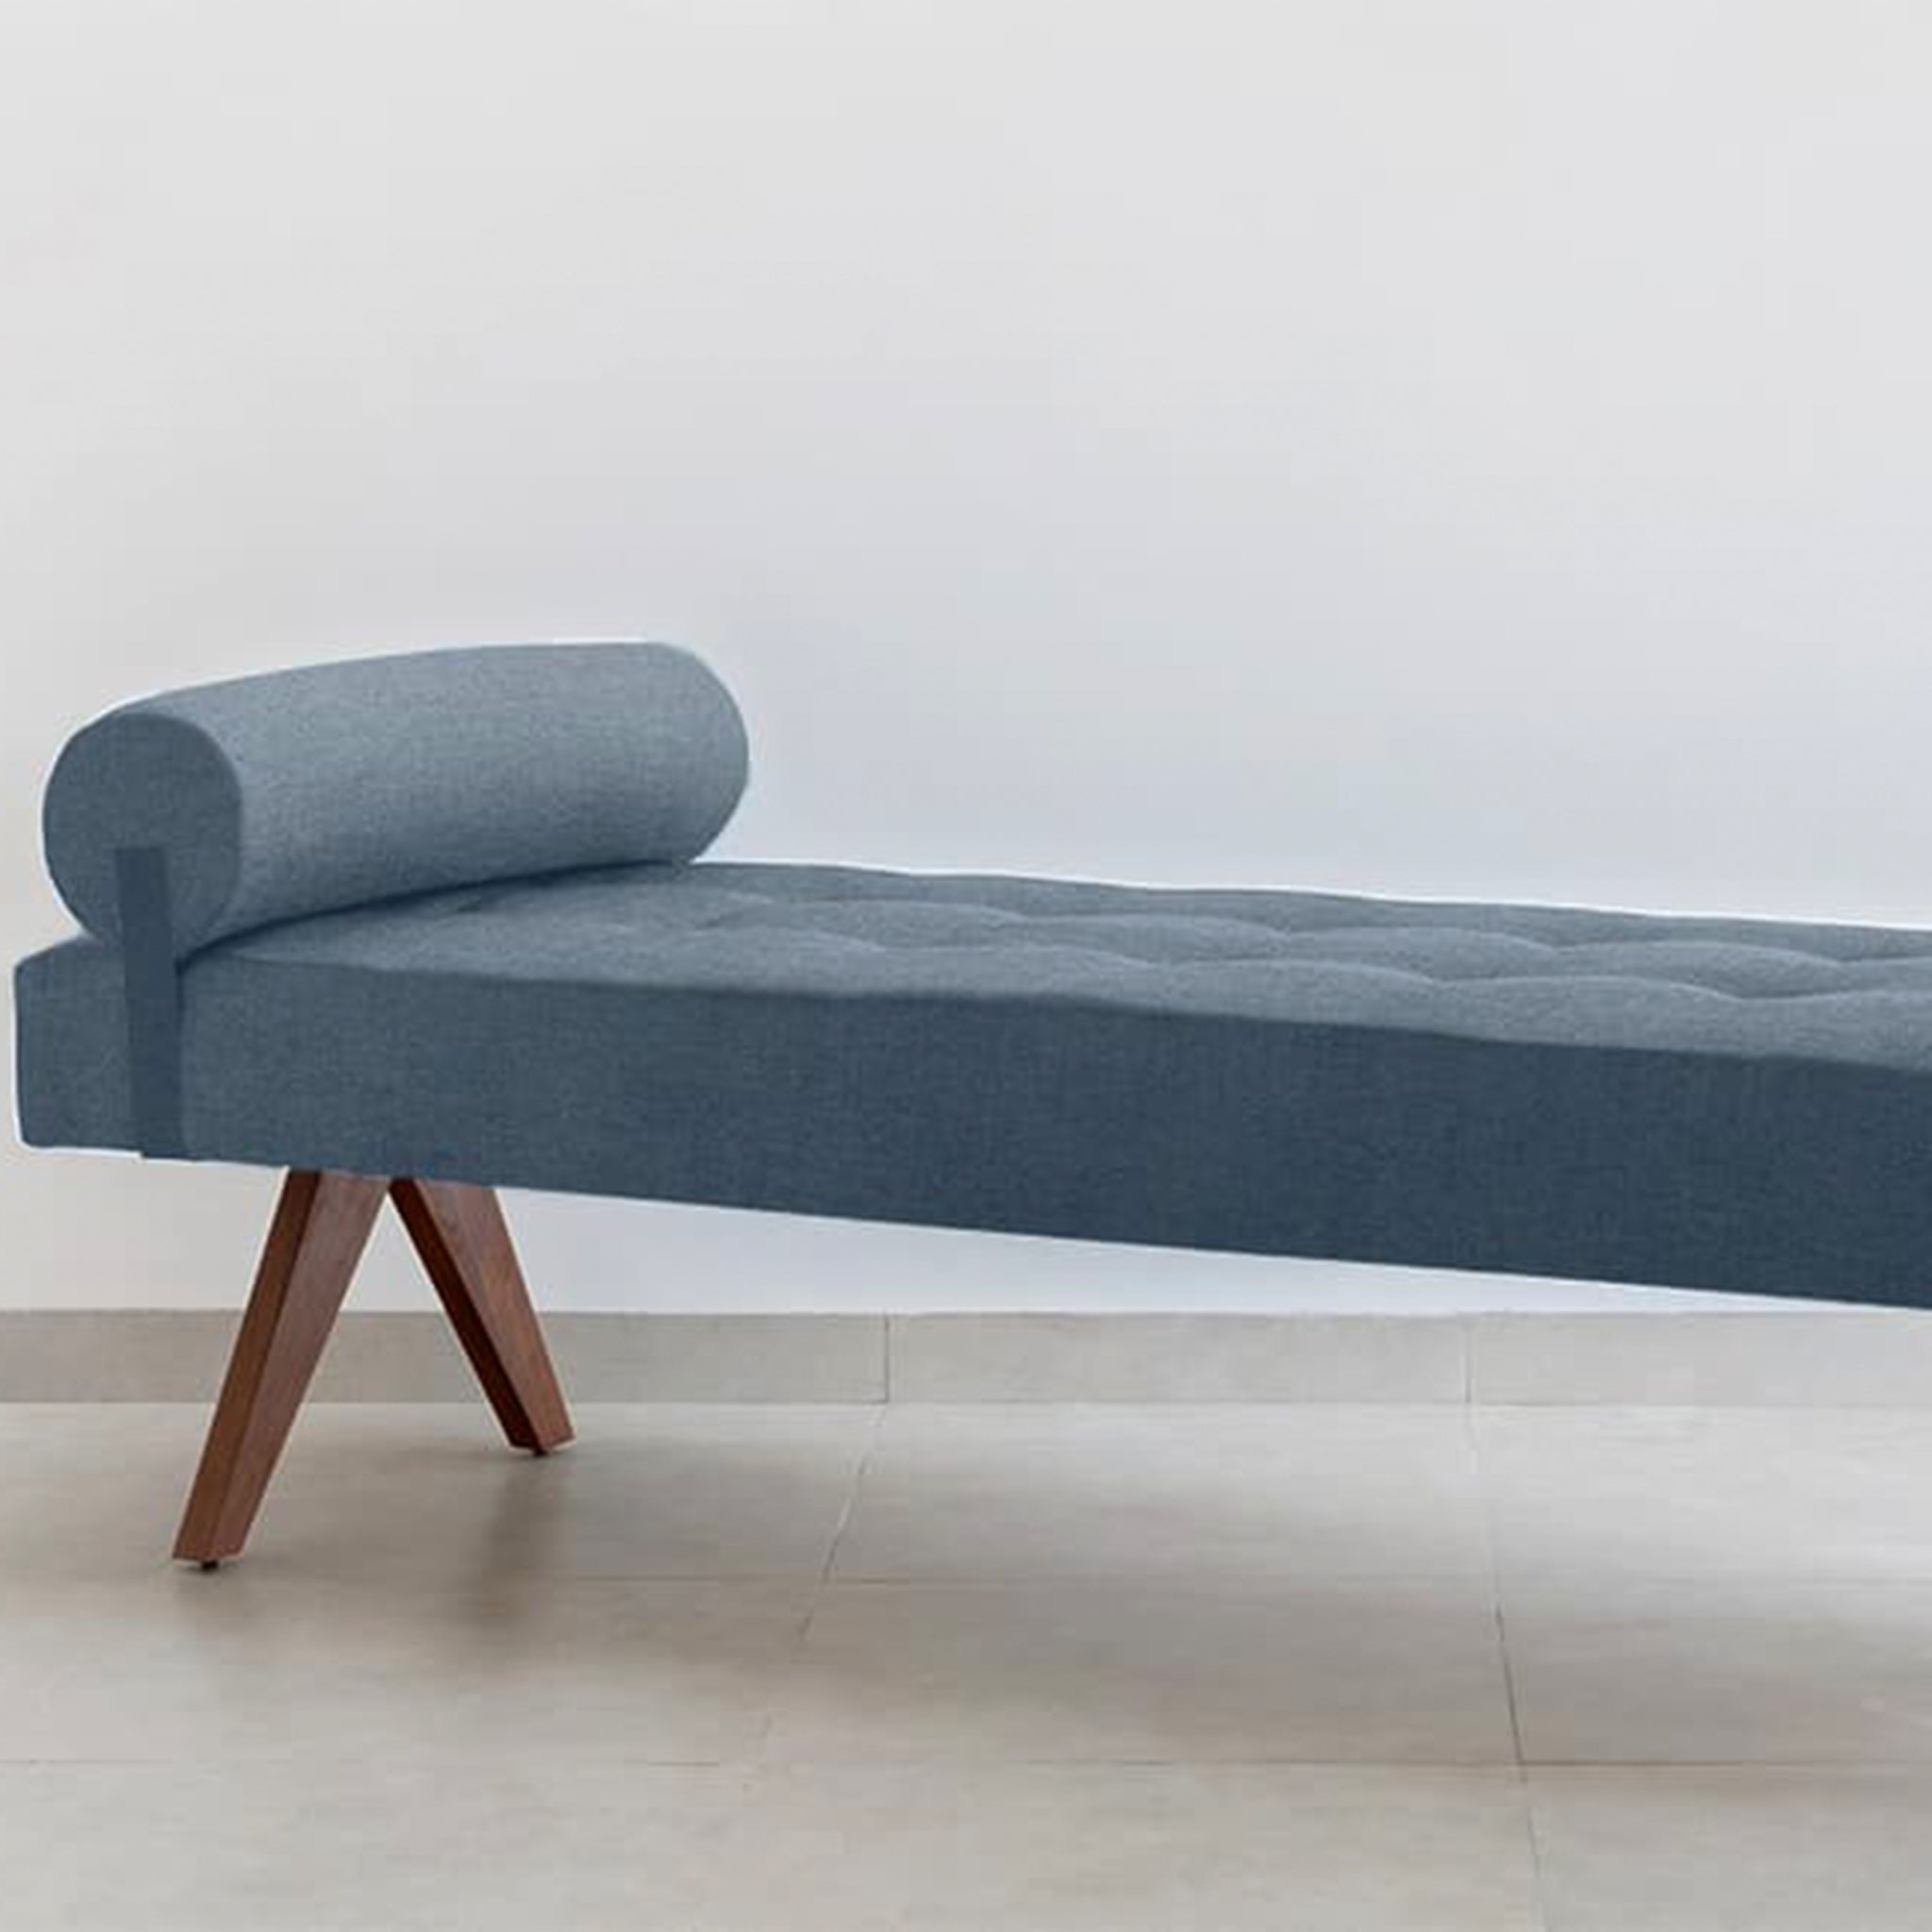 The Jack Daybed with textured fabric options